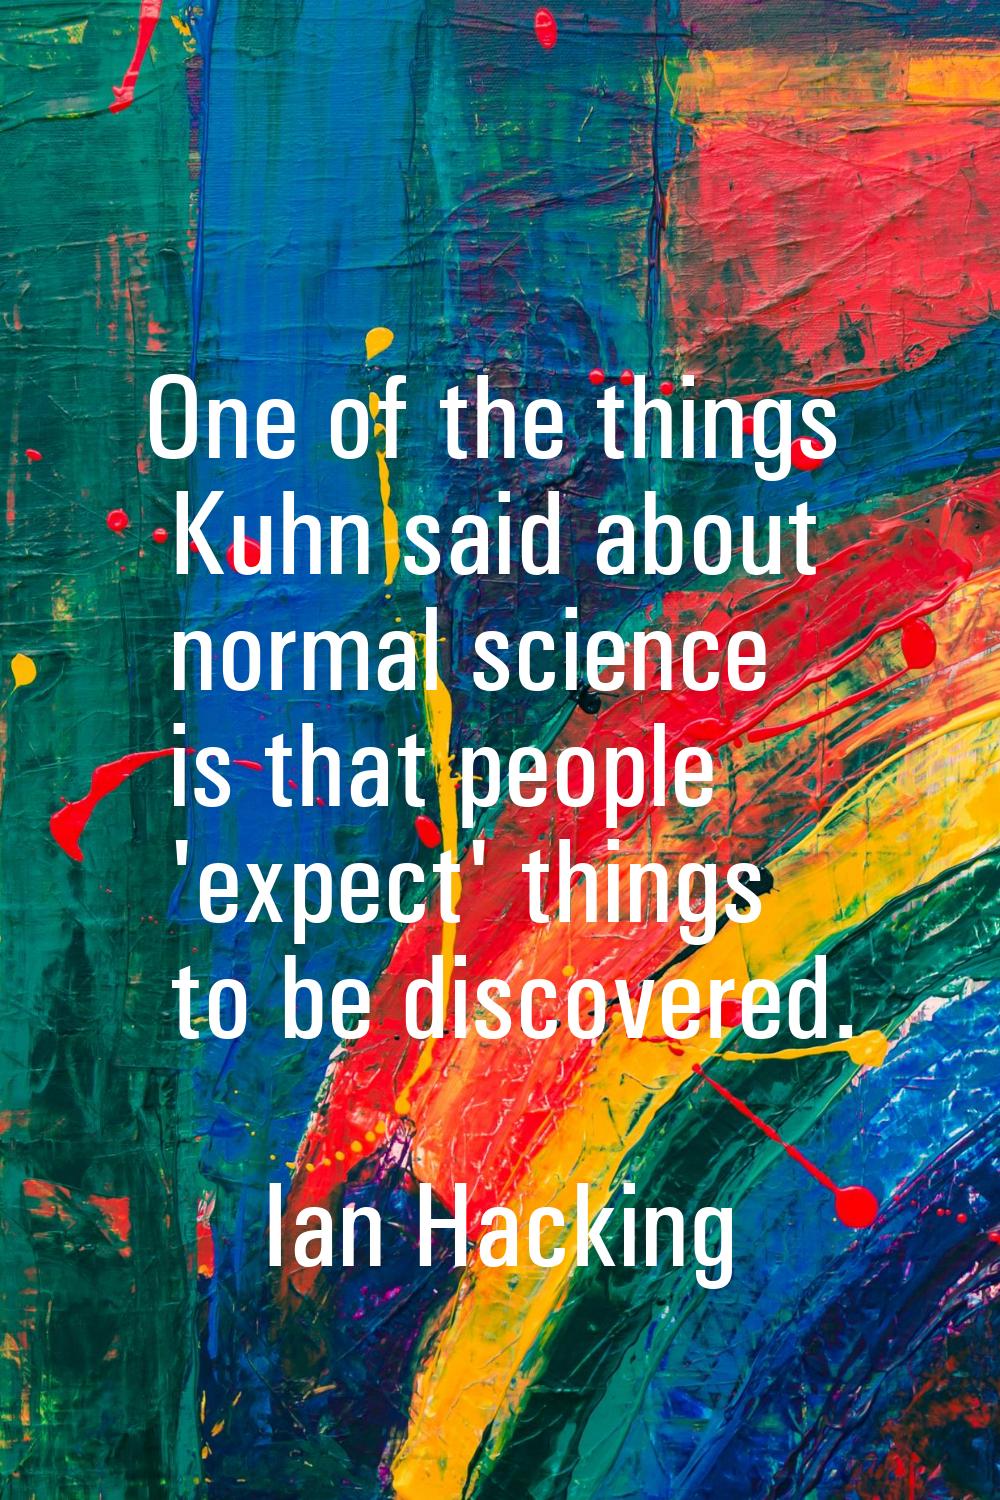 One of the things Kuhn said about normal science is that people 'expect' things to be discovered.